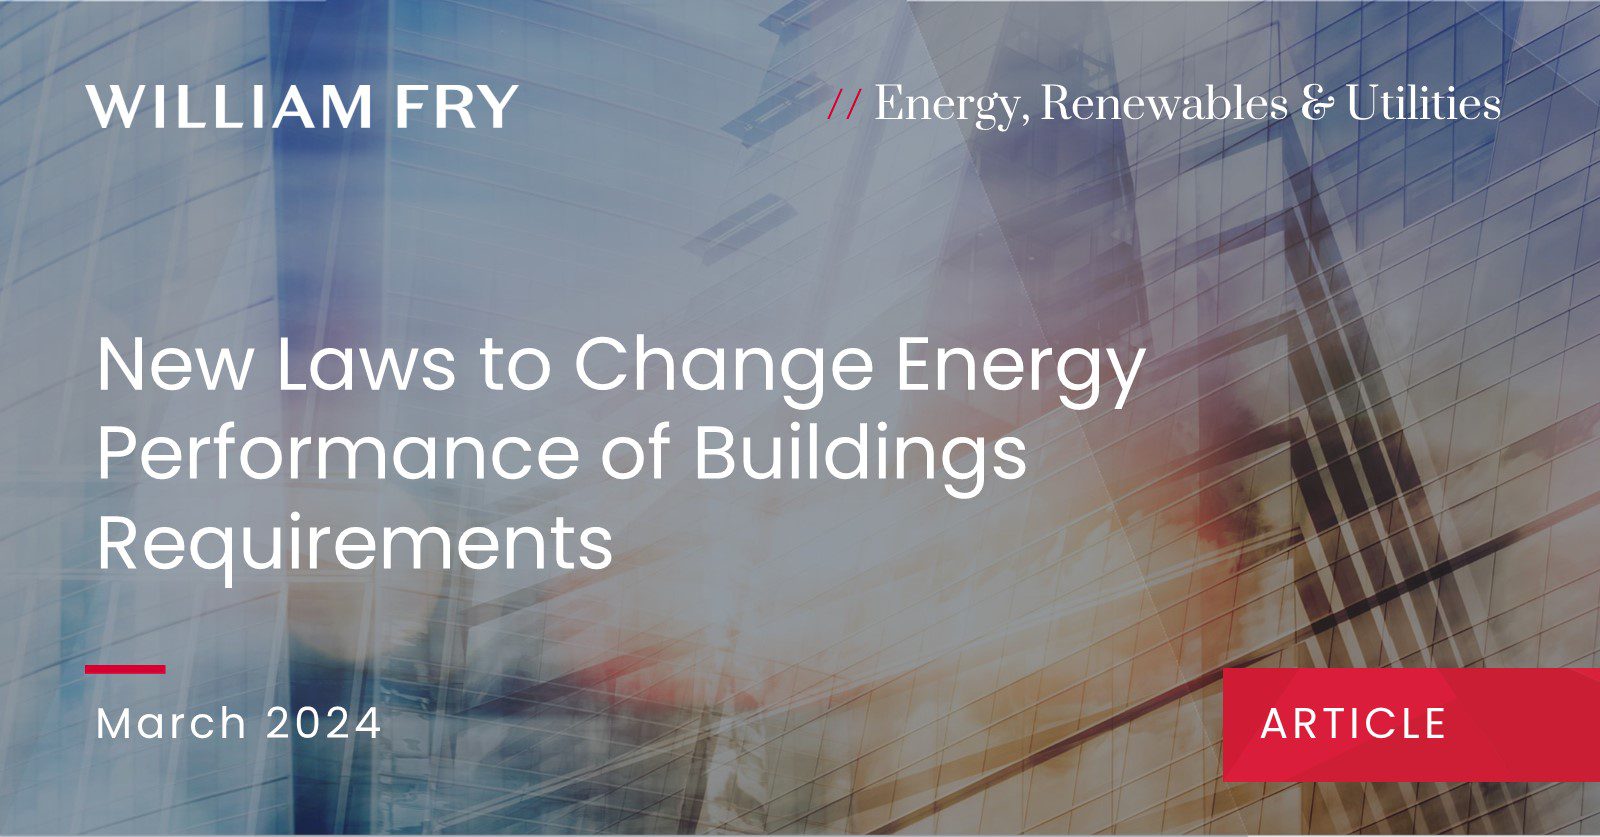 New Laws to Change Energy Performance of Buildings Requirements